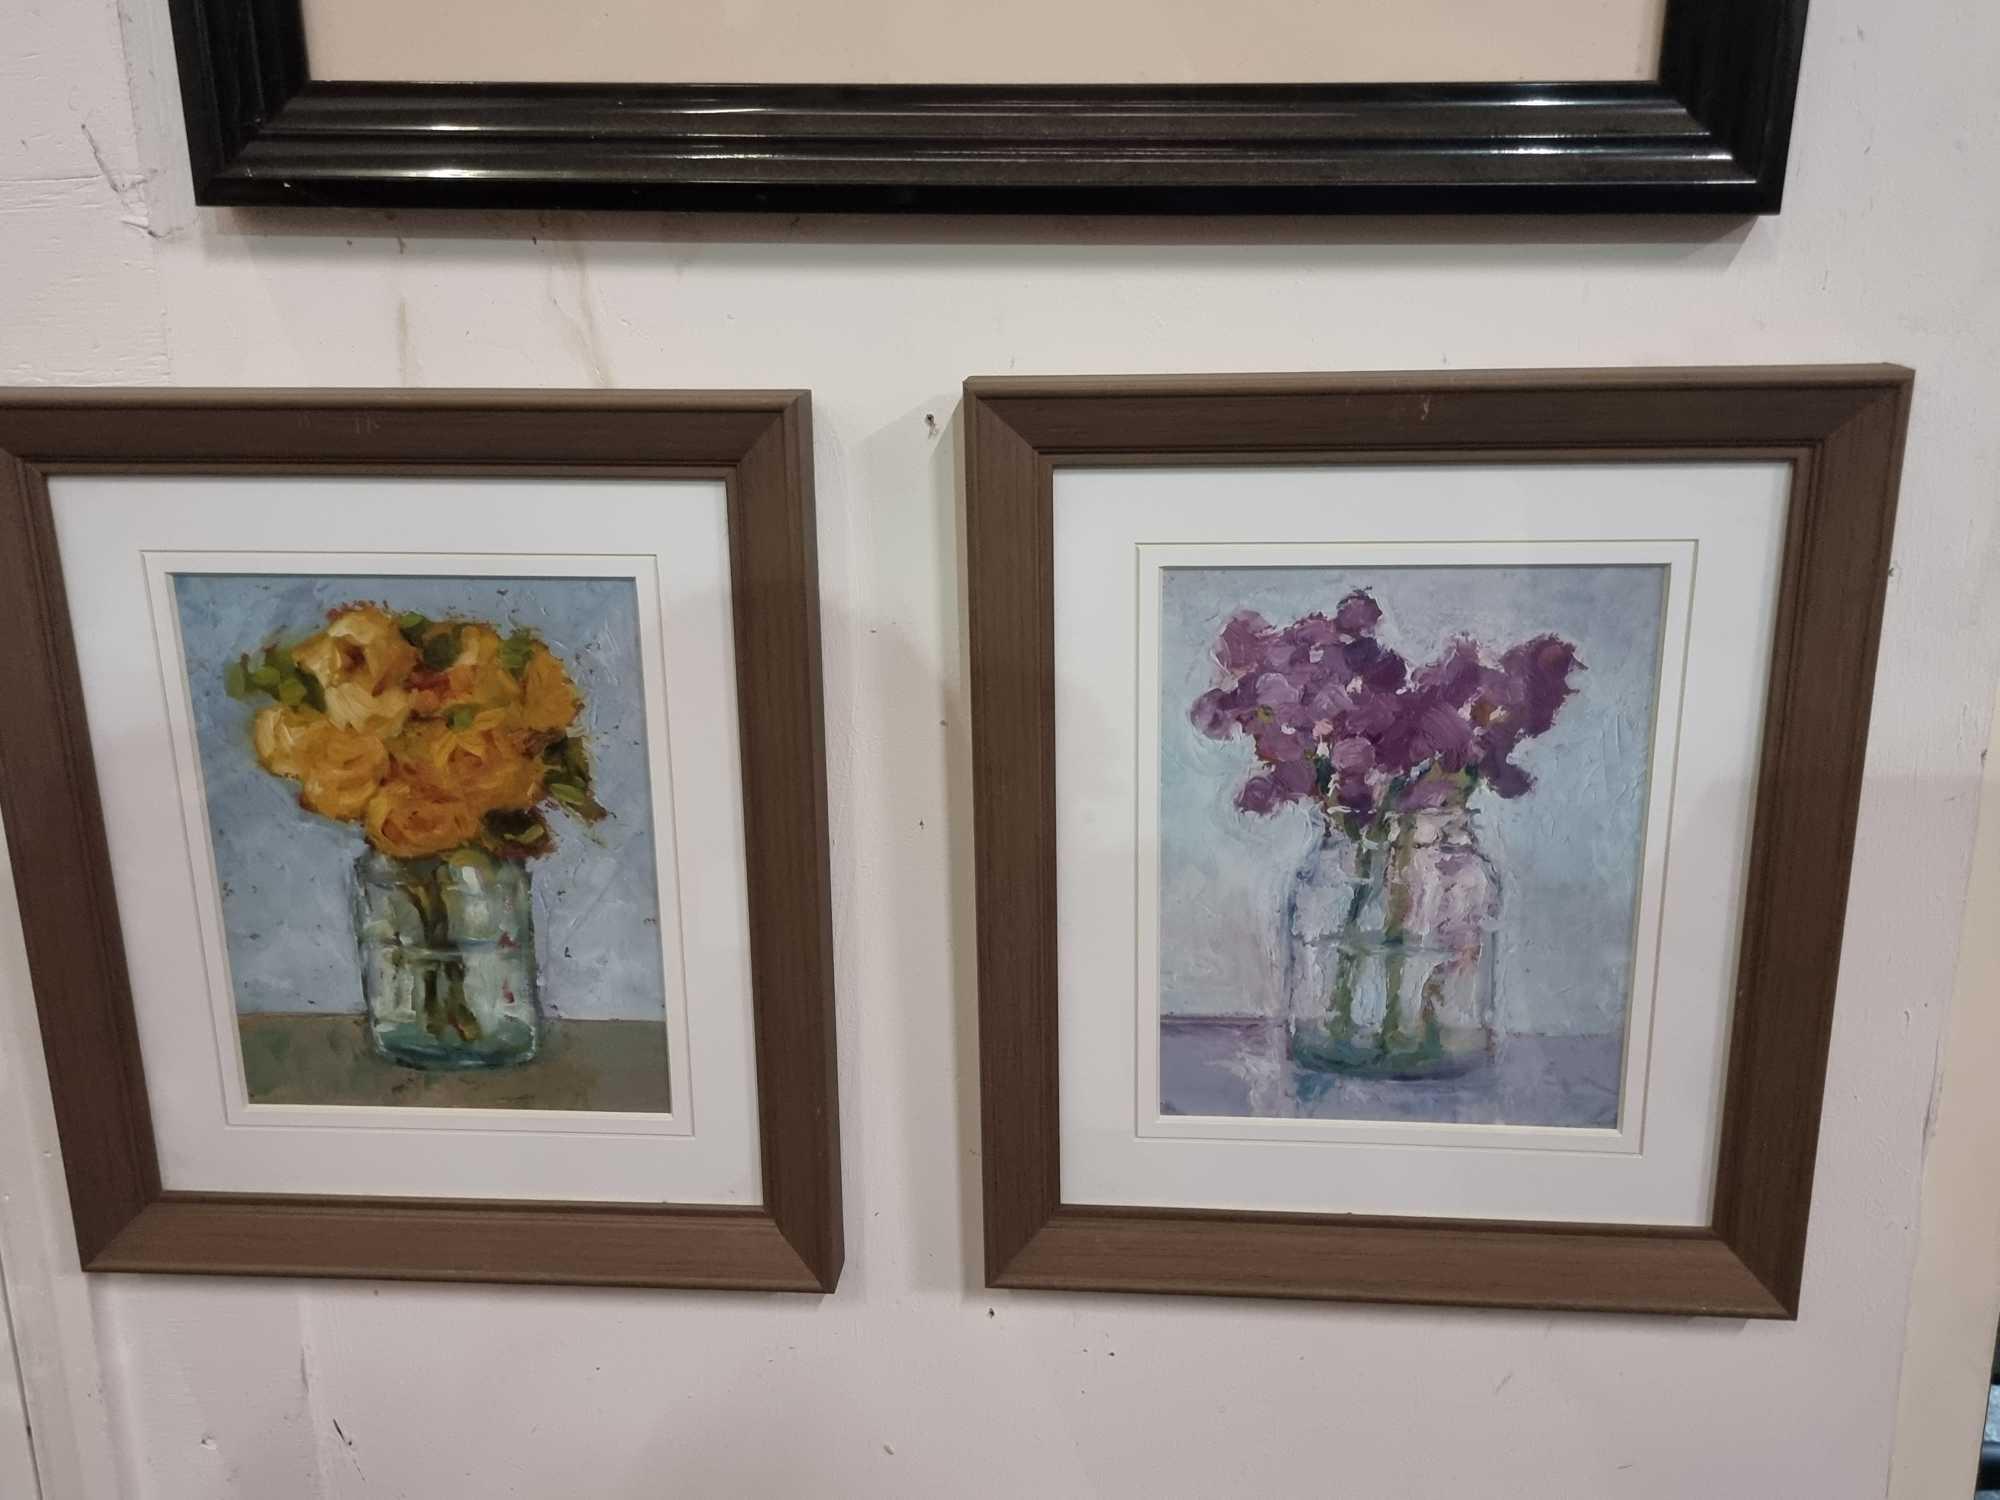 A Set Of Two Prints Depicting Still Life Watercolour Paintings Of Flowers In A Glass Jar In Modern - Image 2 of 4